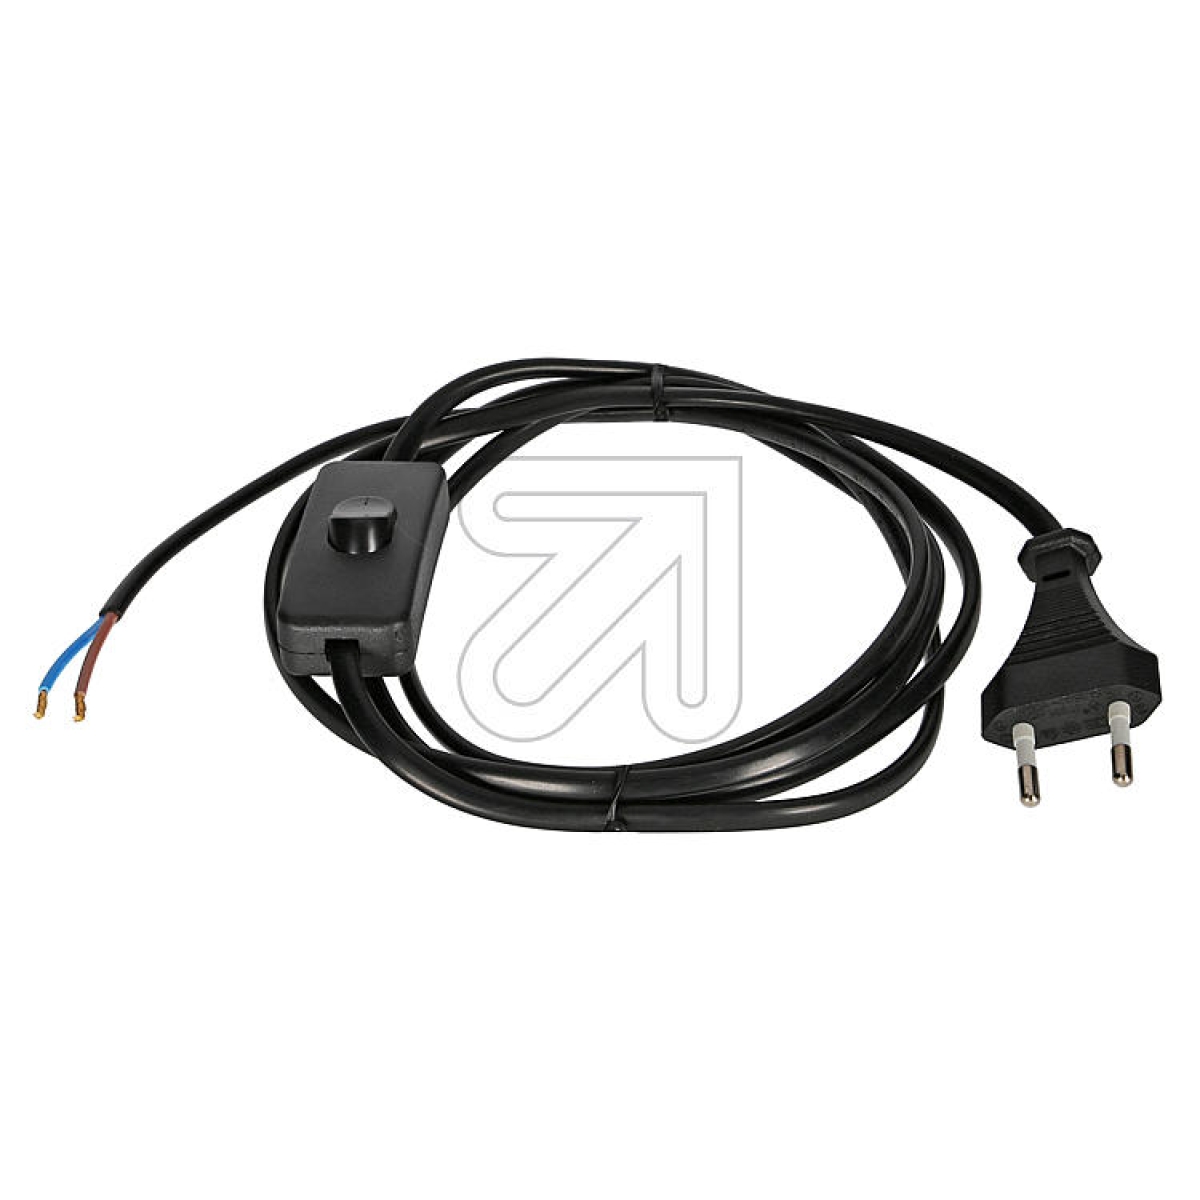 EGBEuro connection cable with switch, black, 1.8m-Price for 5 pcs.Article-No: 022920